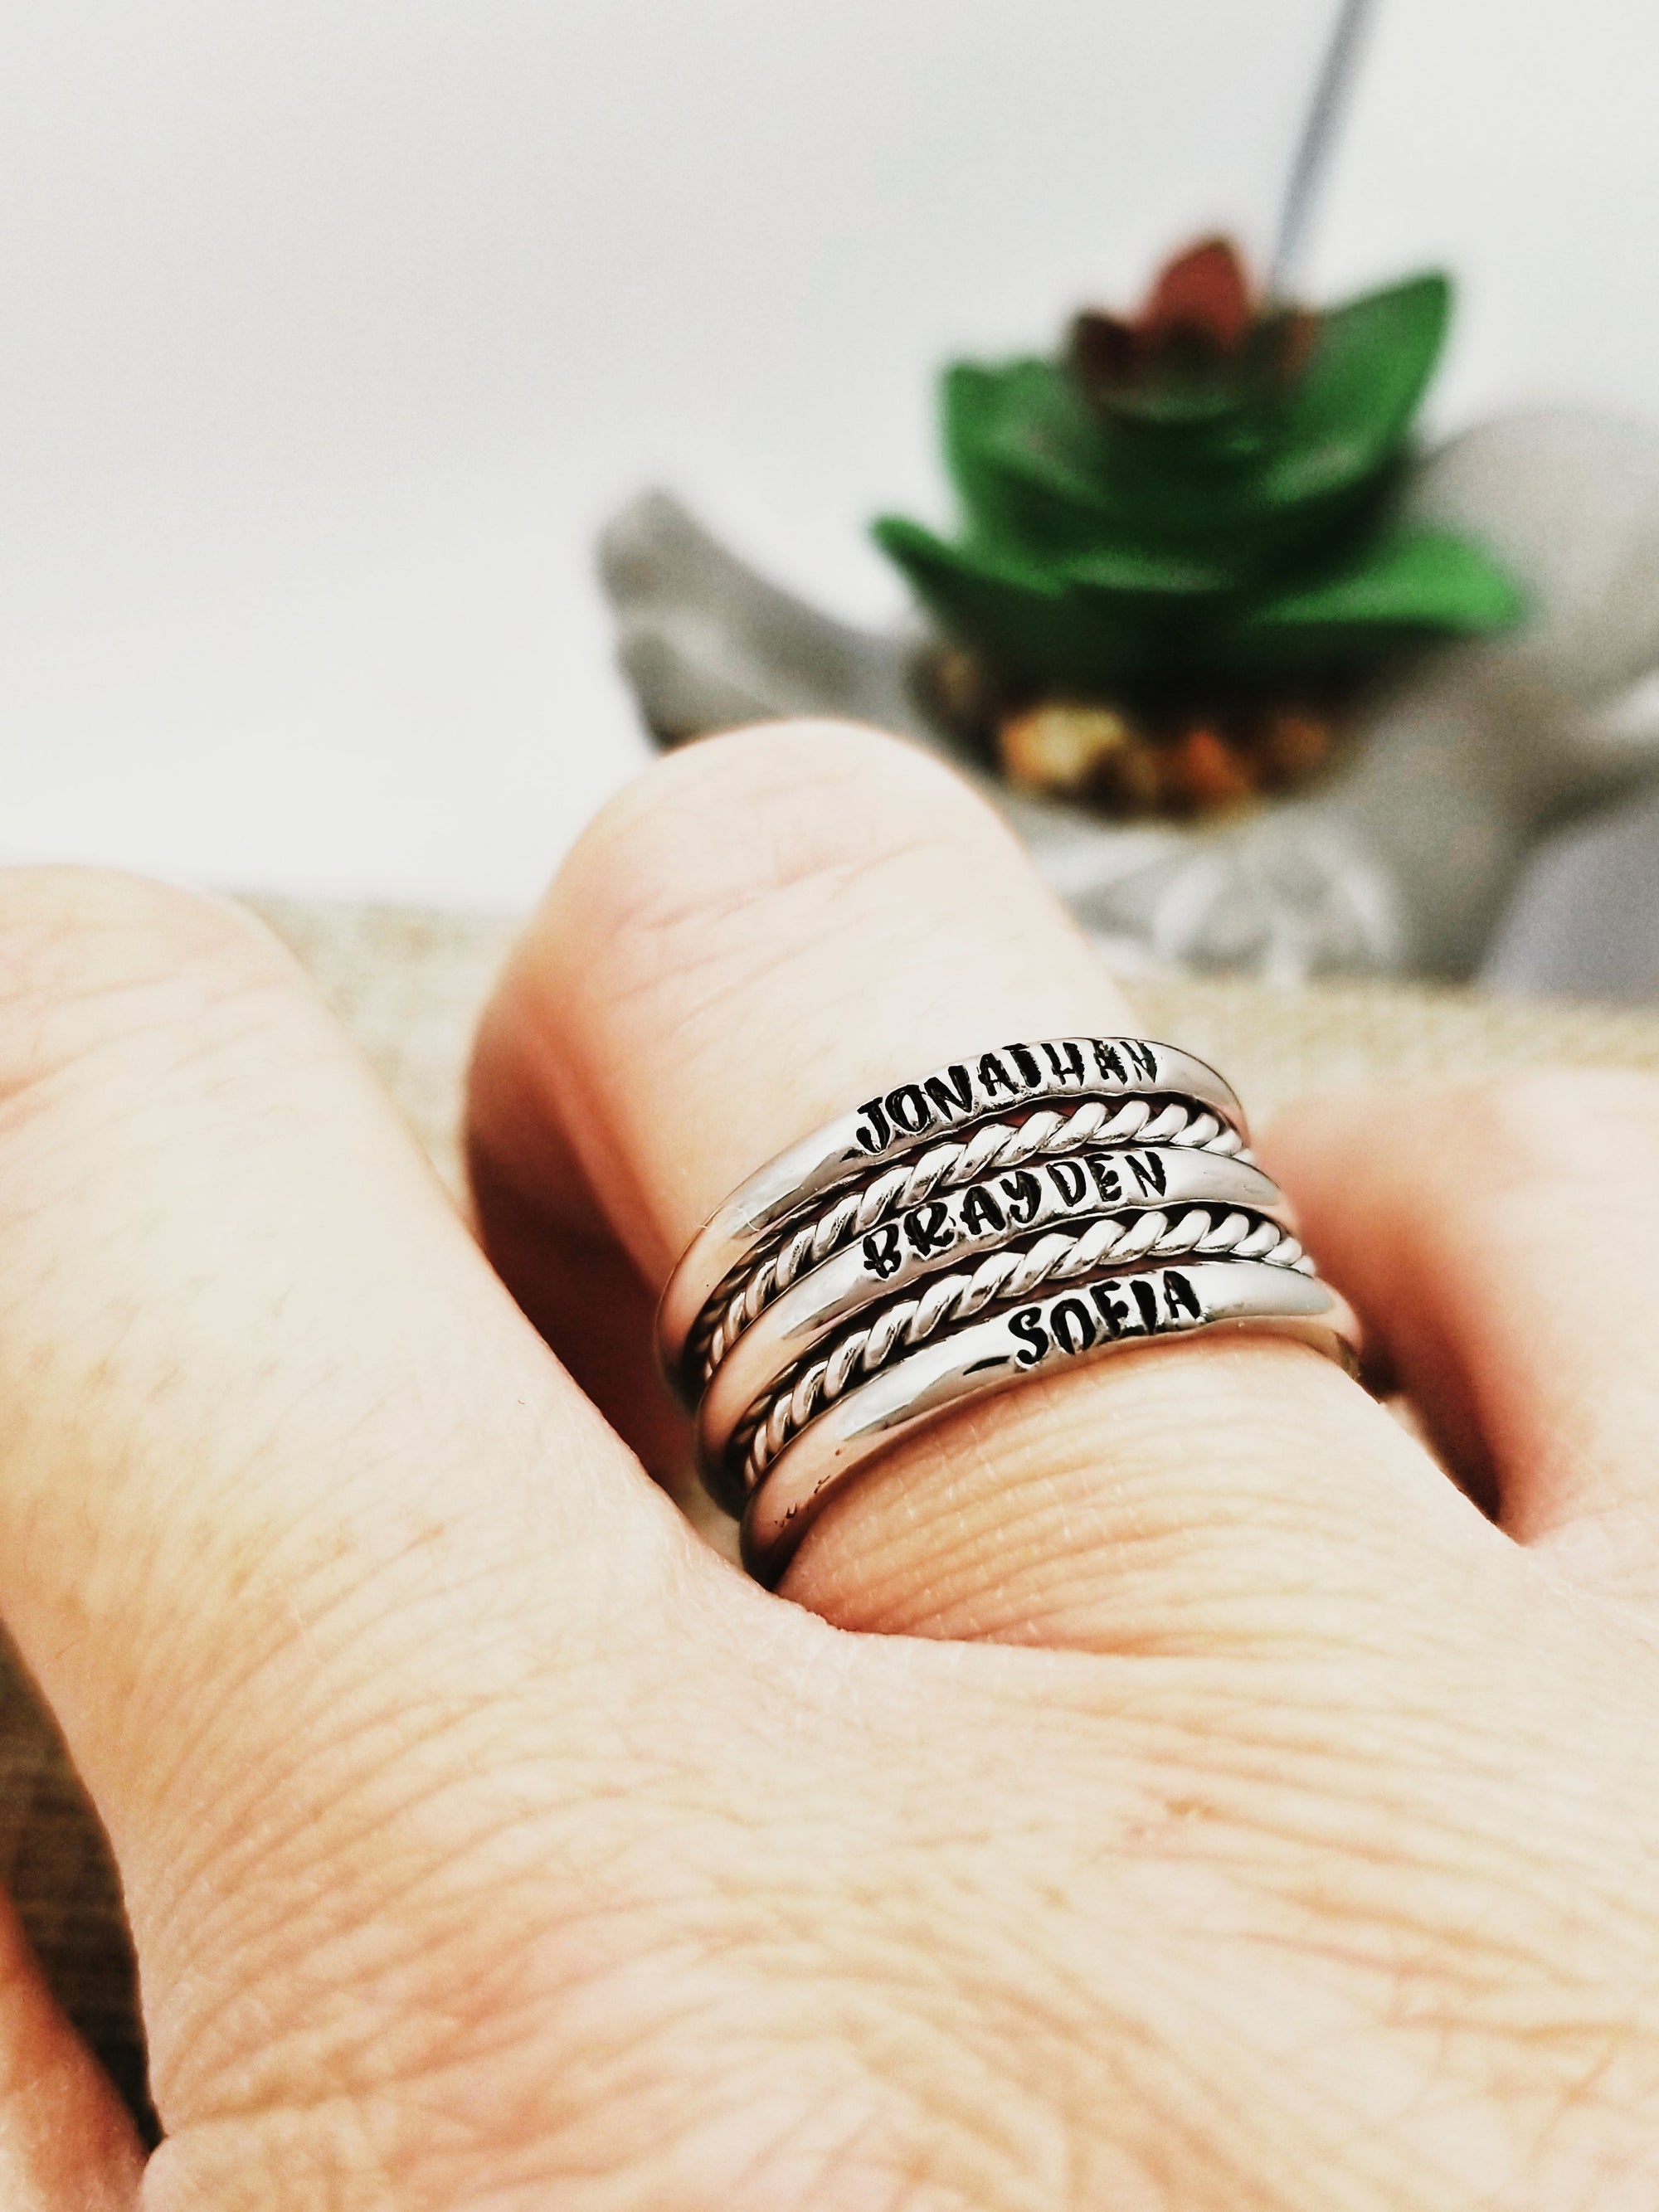 Tiny Stacking Rings, Custom Hand Stamped Rings, Personalized Gift, Eternity rings, Stainless Steel (Copy)